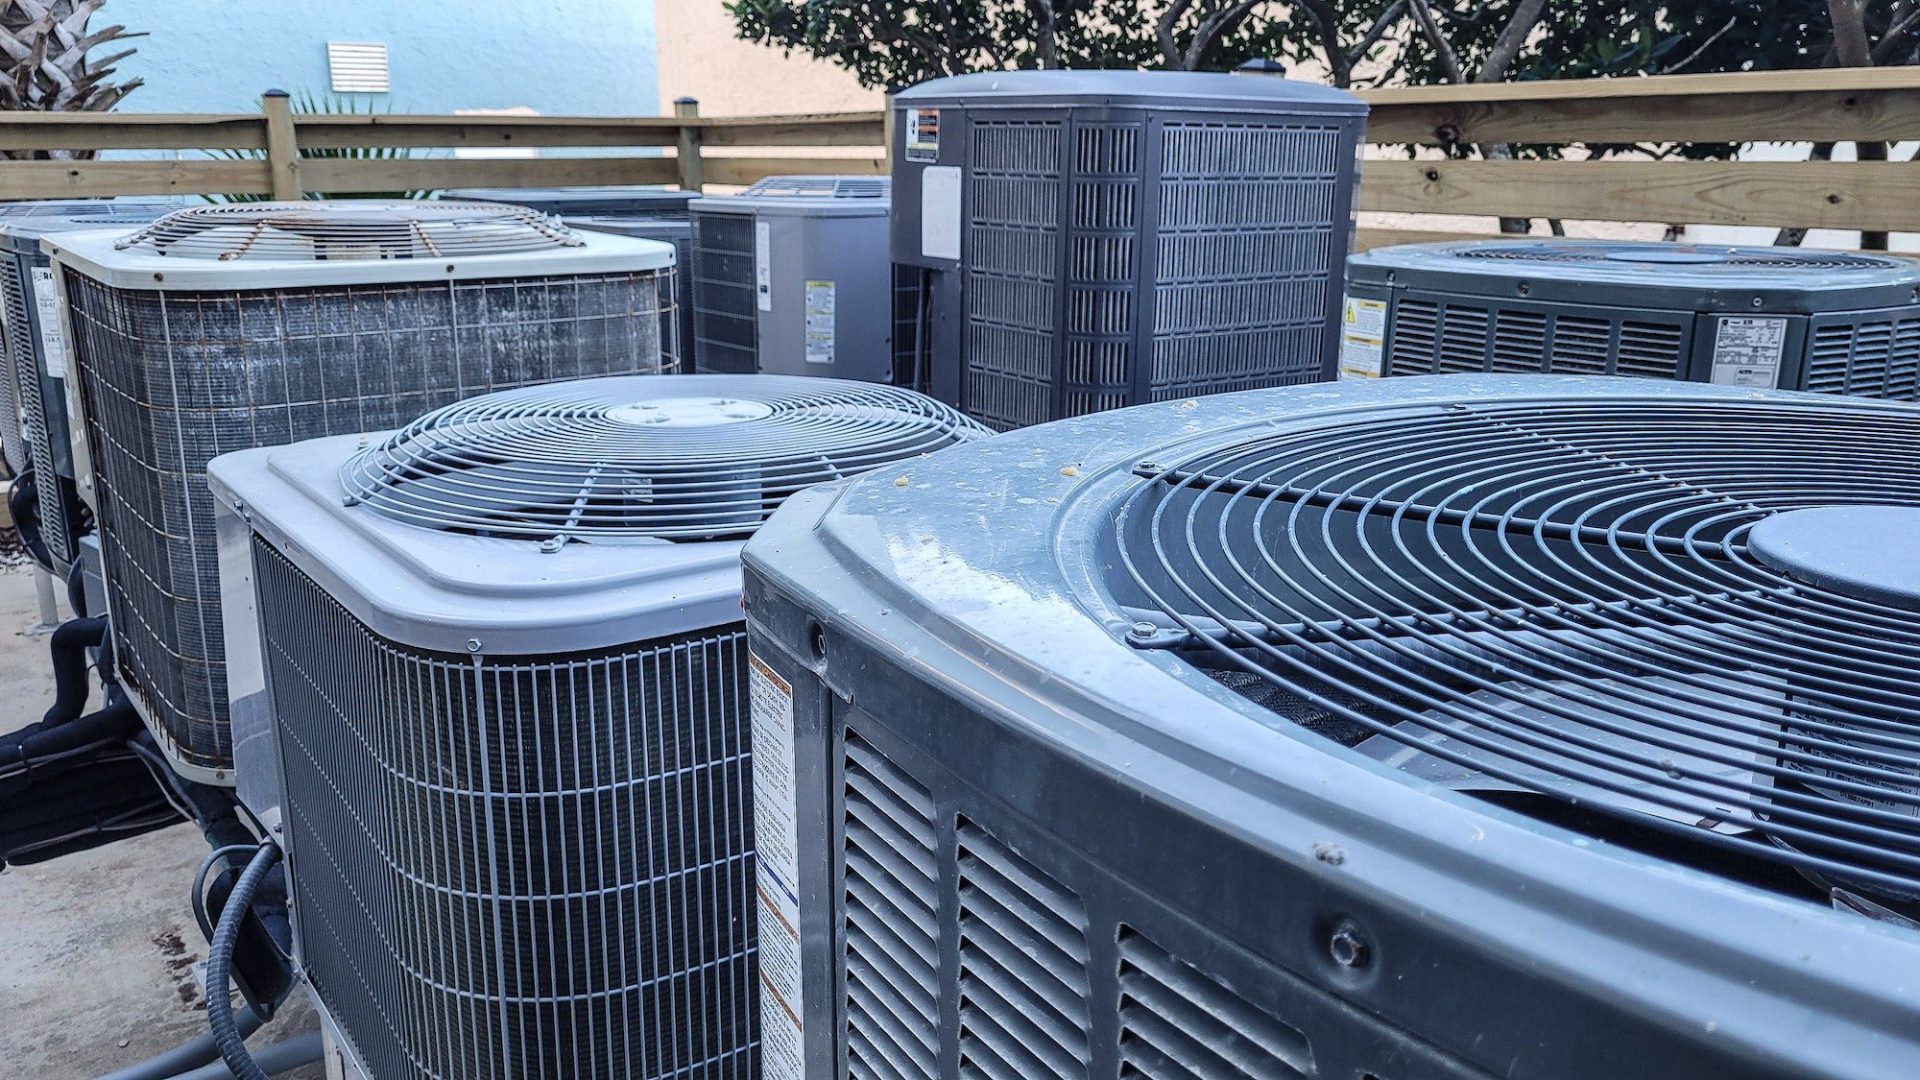 Reveal Hidden Potential: 7 Ways HVAC Units Empower Your Business